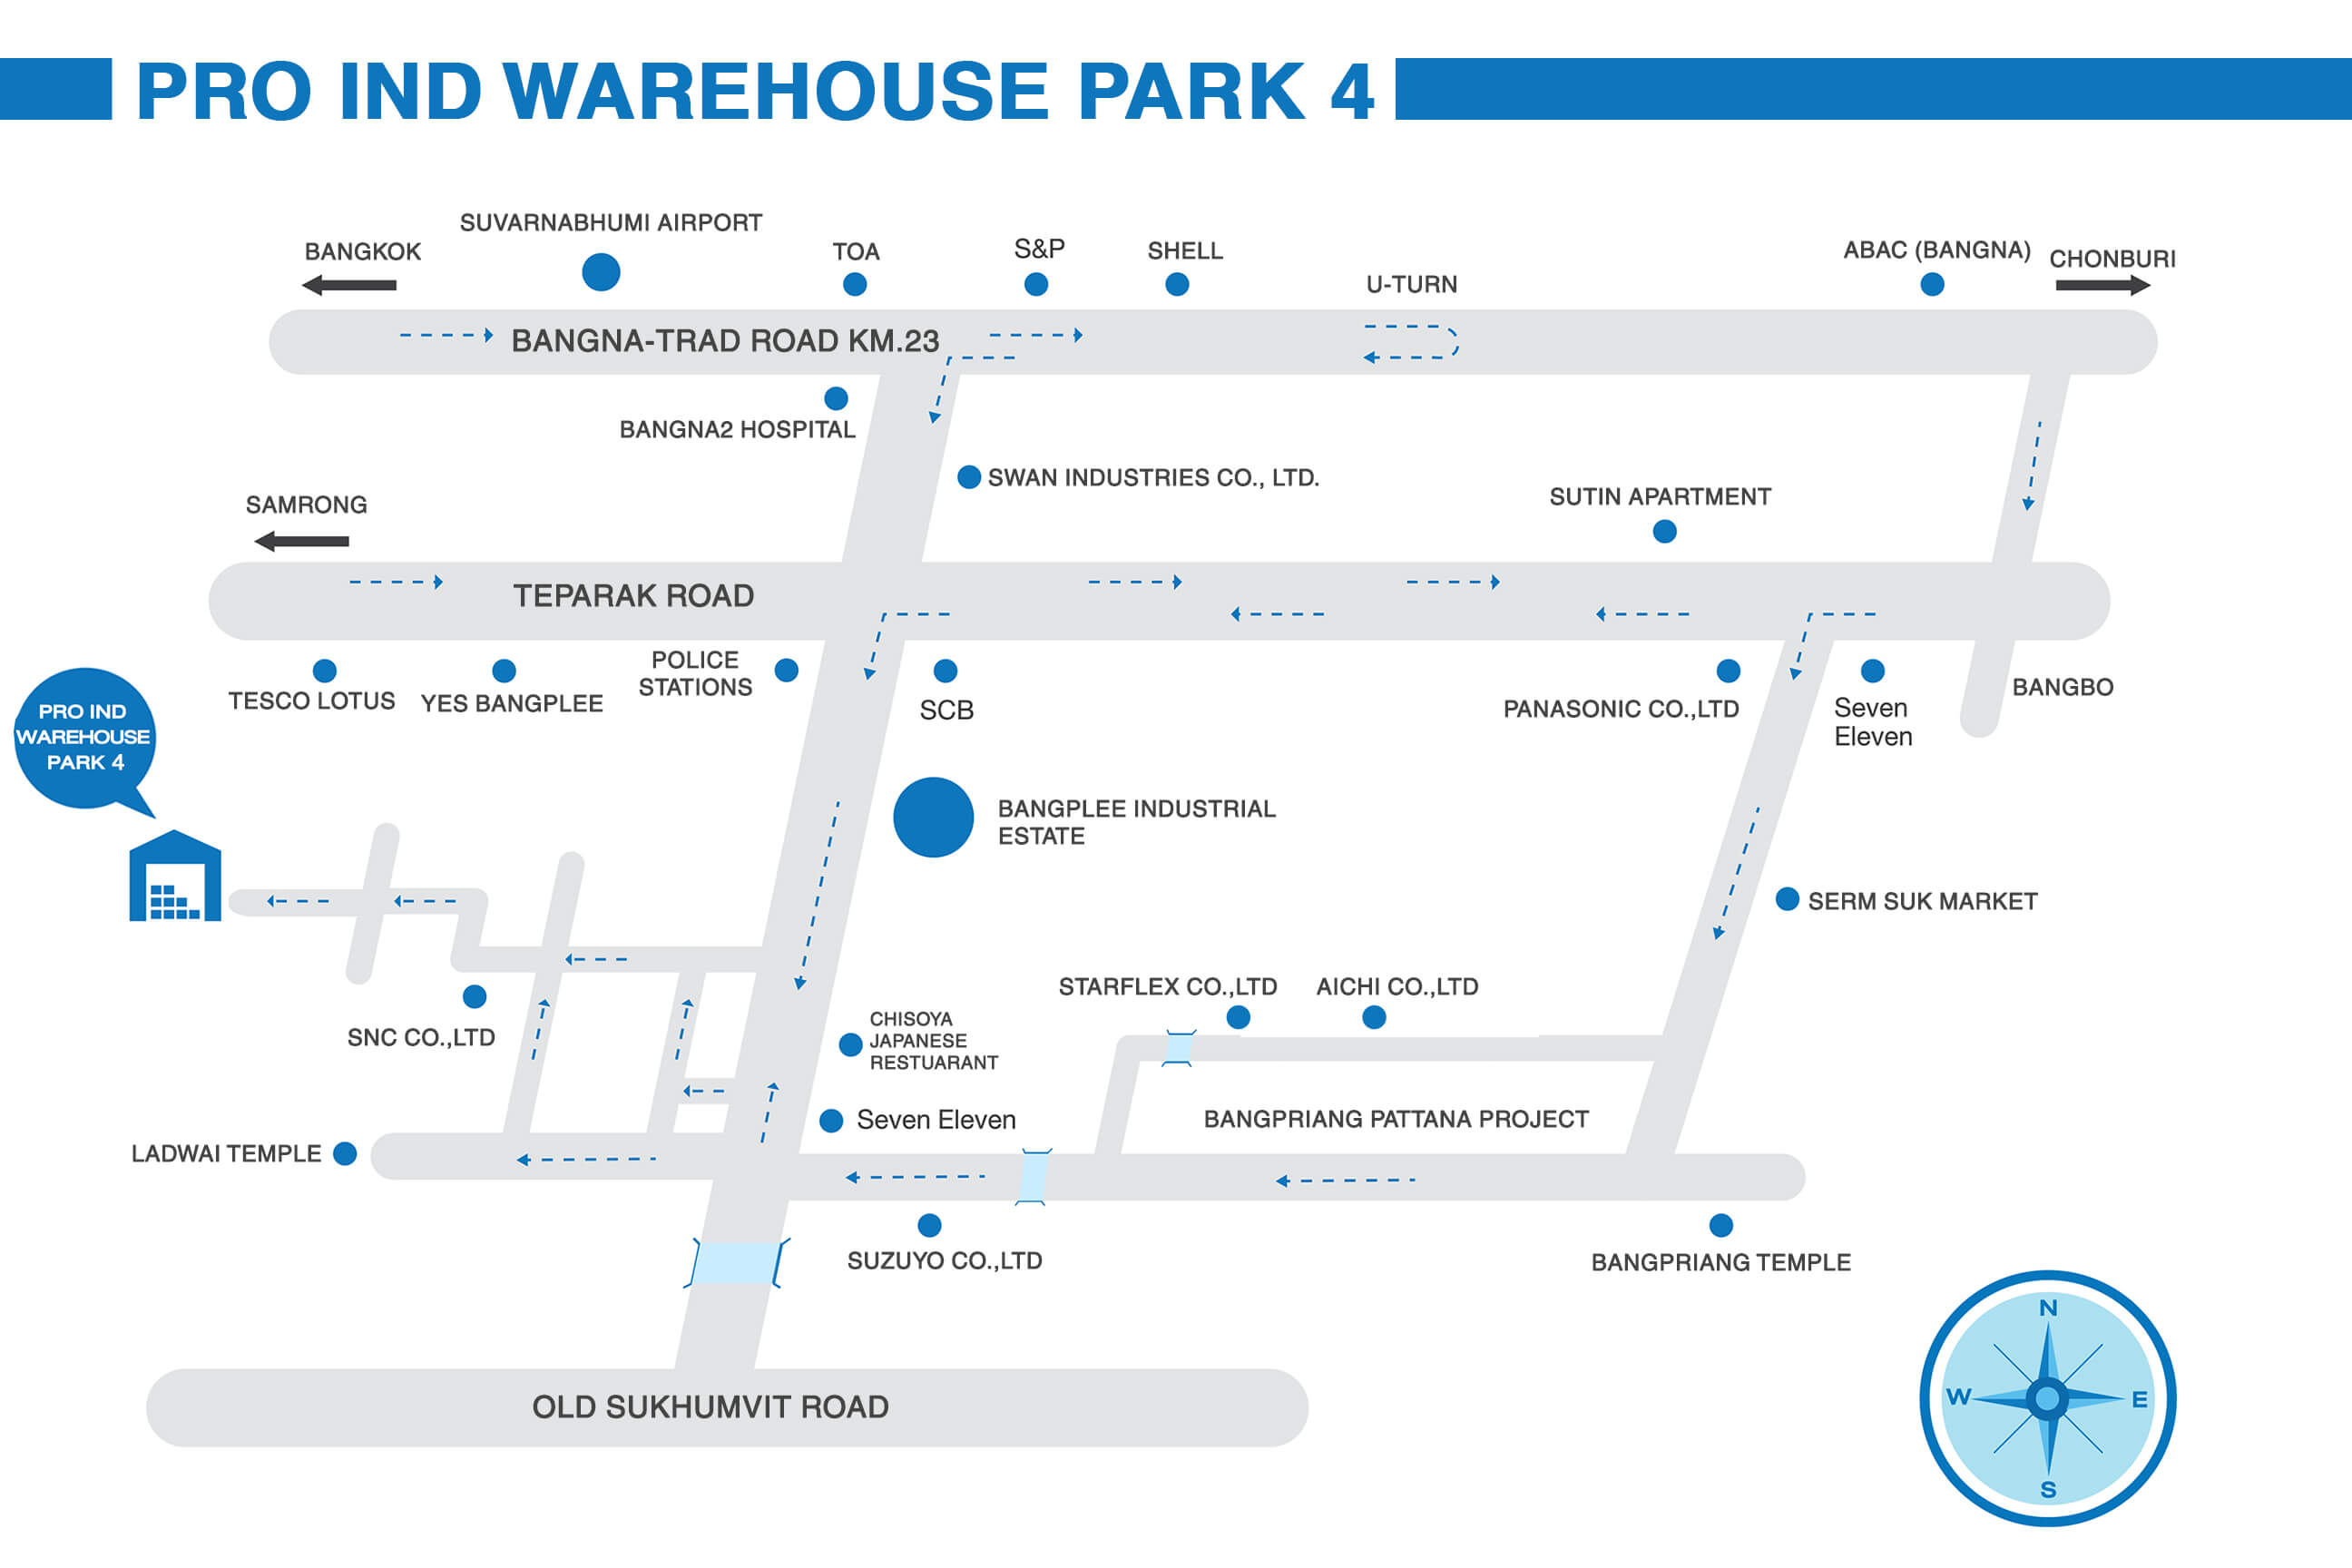 Pro Ind warehouse Park 4 Project Map 